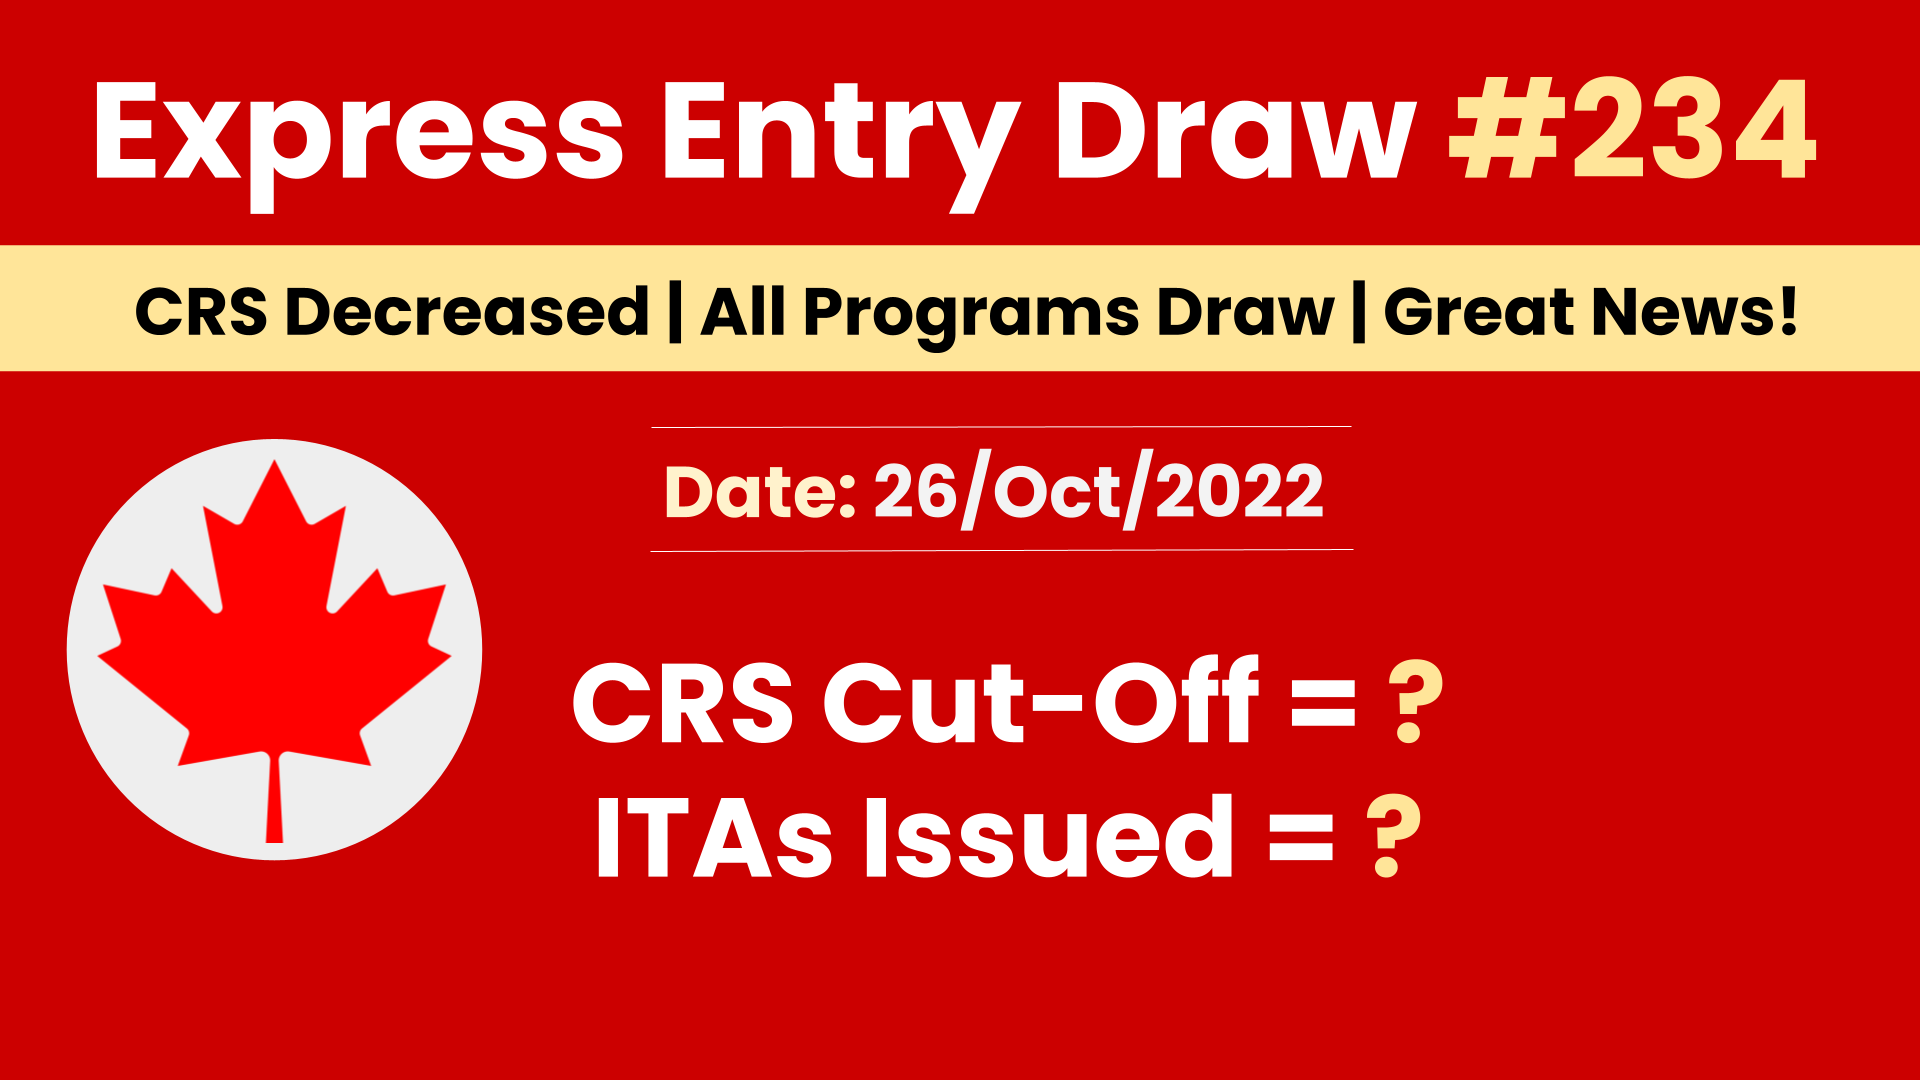 234 Express Entry Draw, CRS Score, ITAs Issued